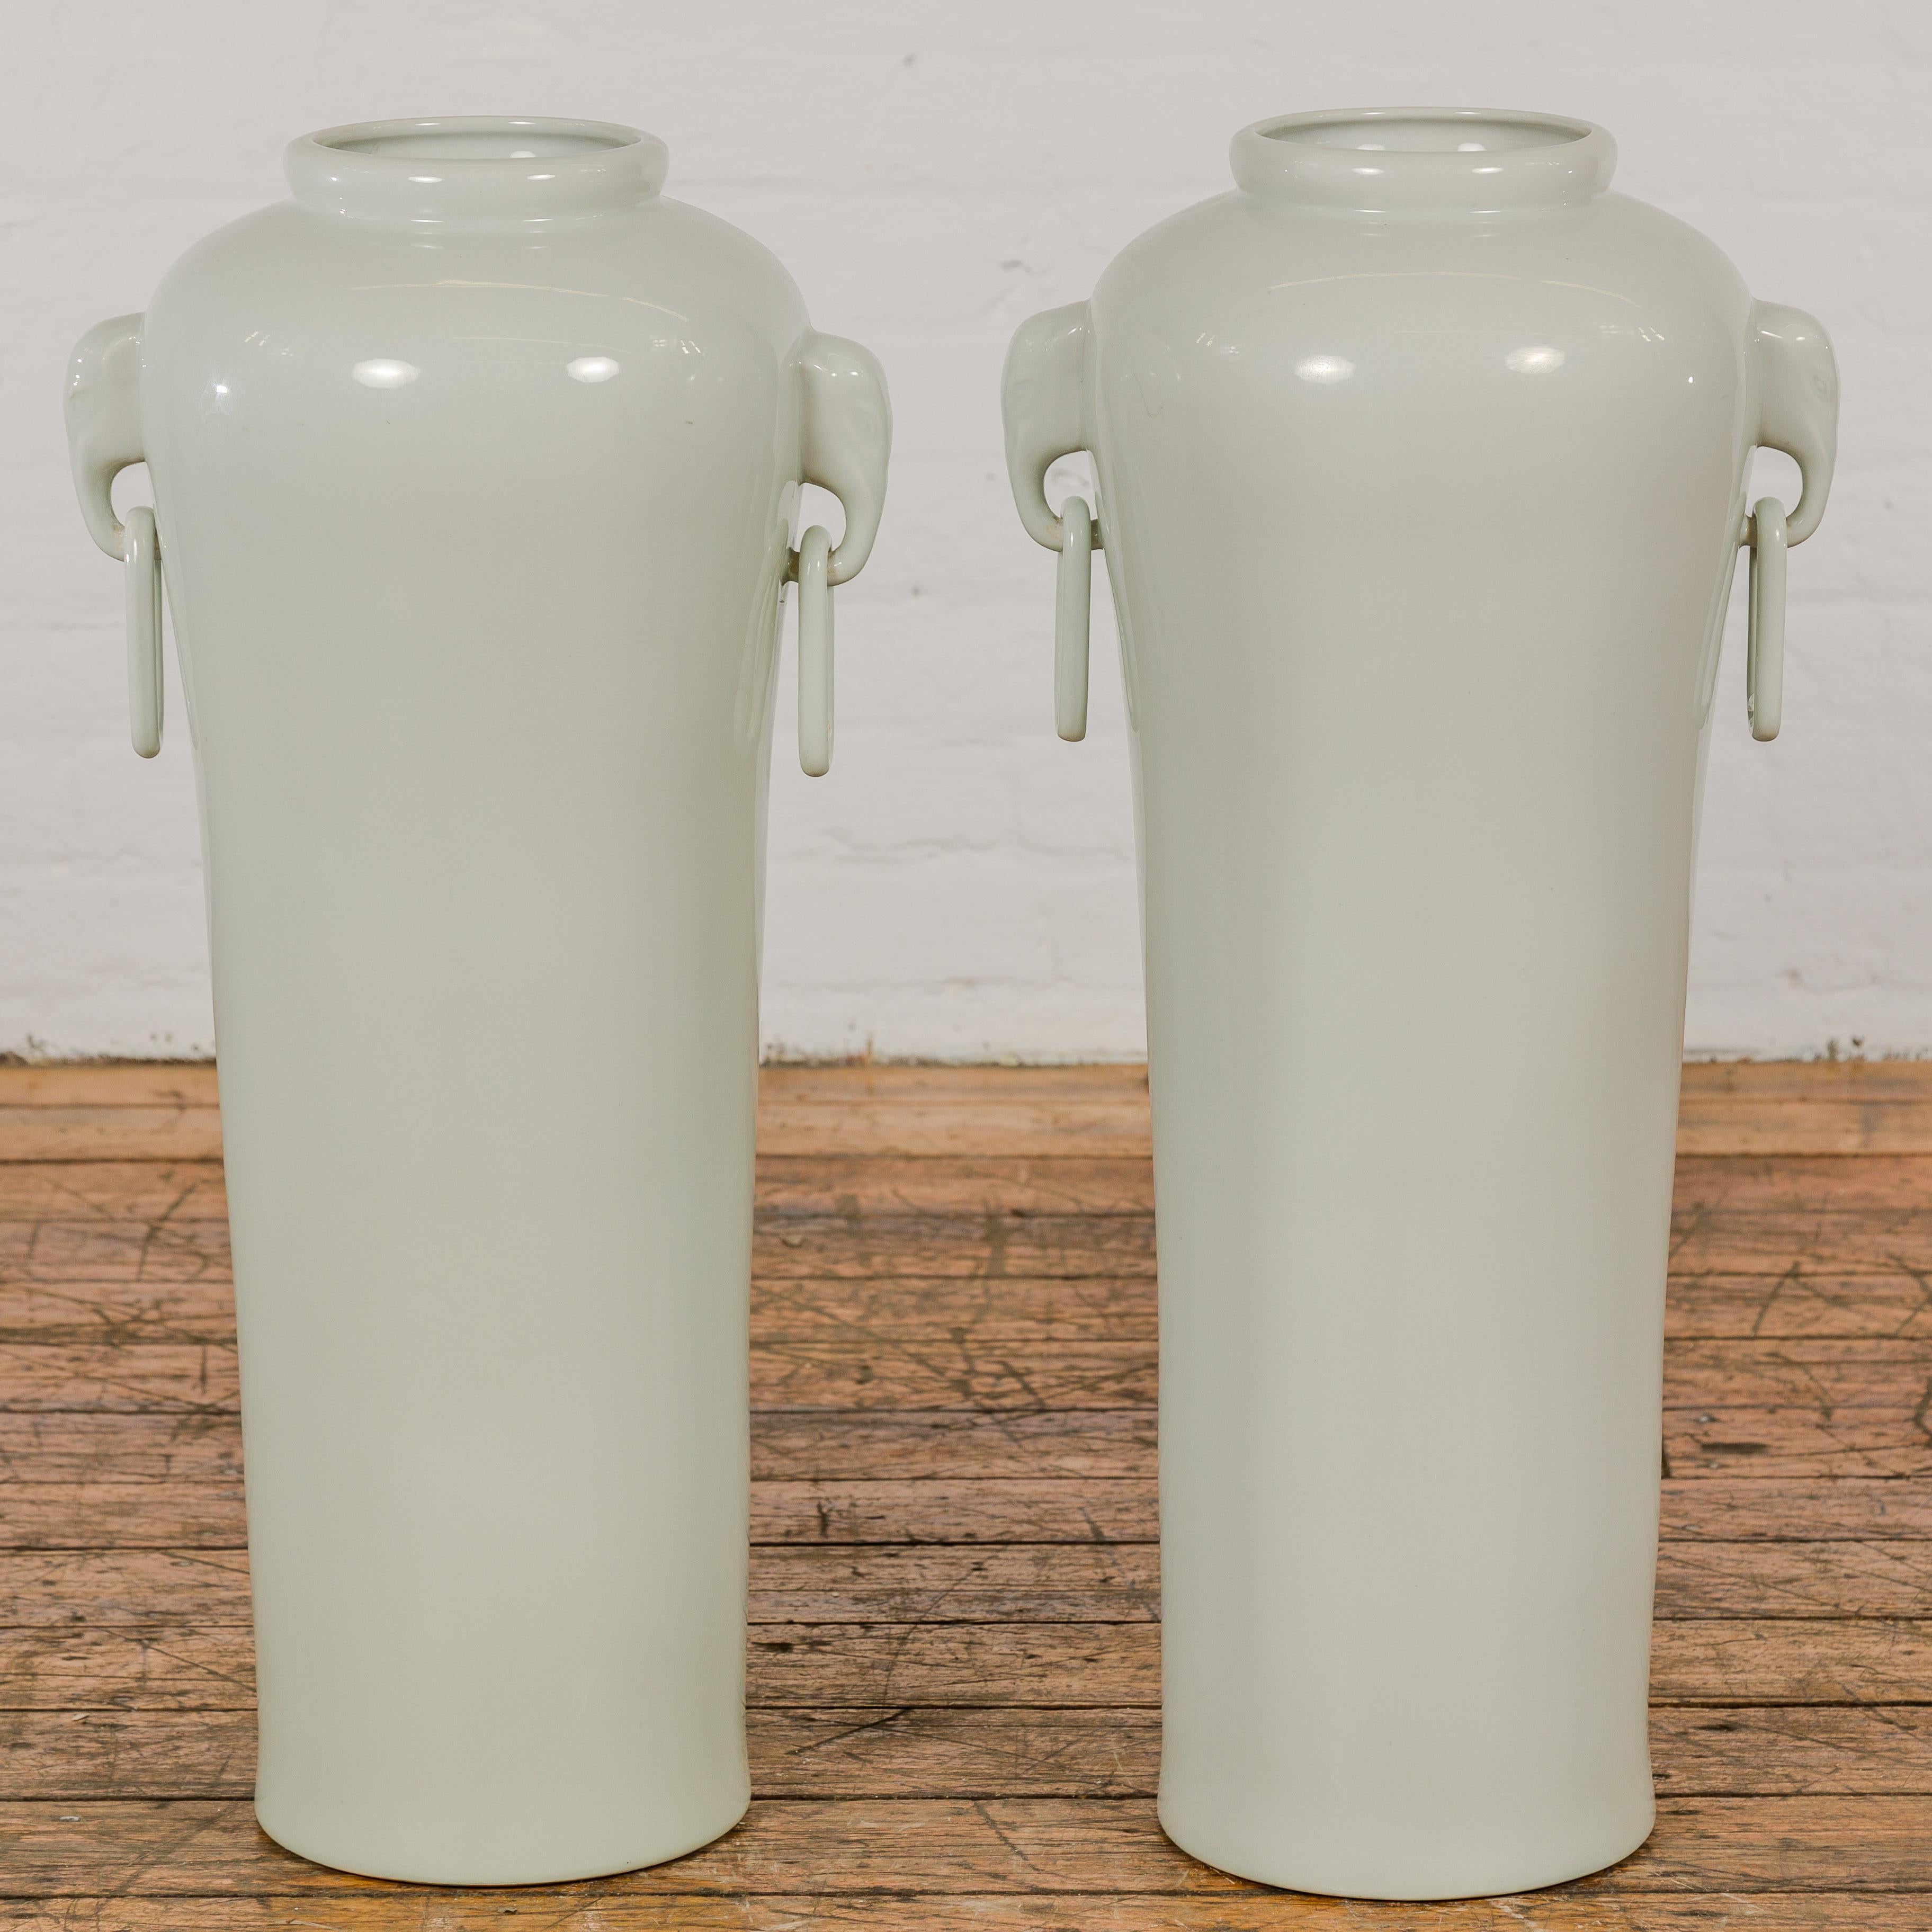 A very near pair of white porcelain tall and slender vintage altar vases with elephant handles, ring pulls and tapering lines. Presenting a near pair of vintage altar vases, these porcelain pieces boast a towering elegance, enriched by their white